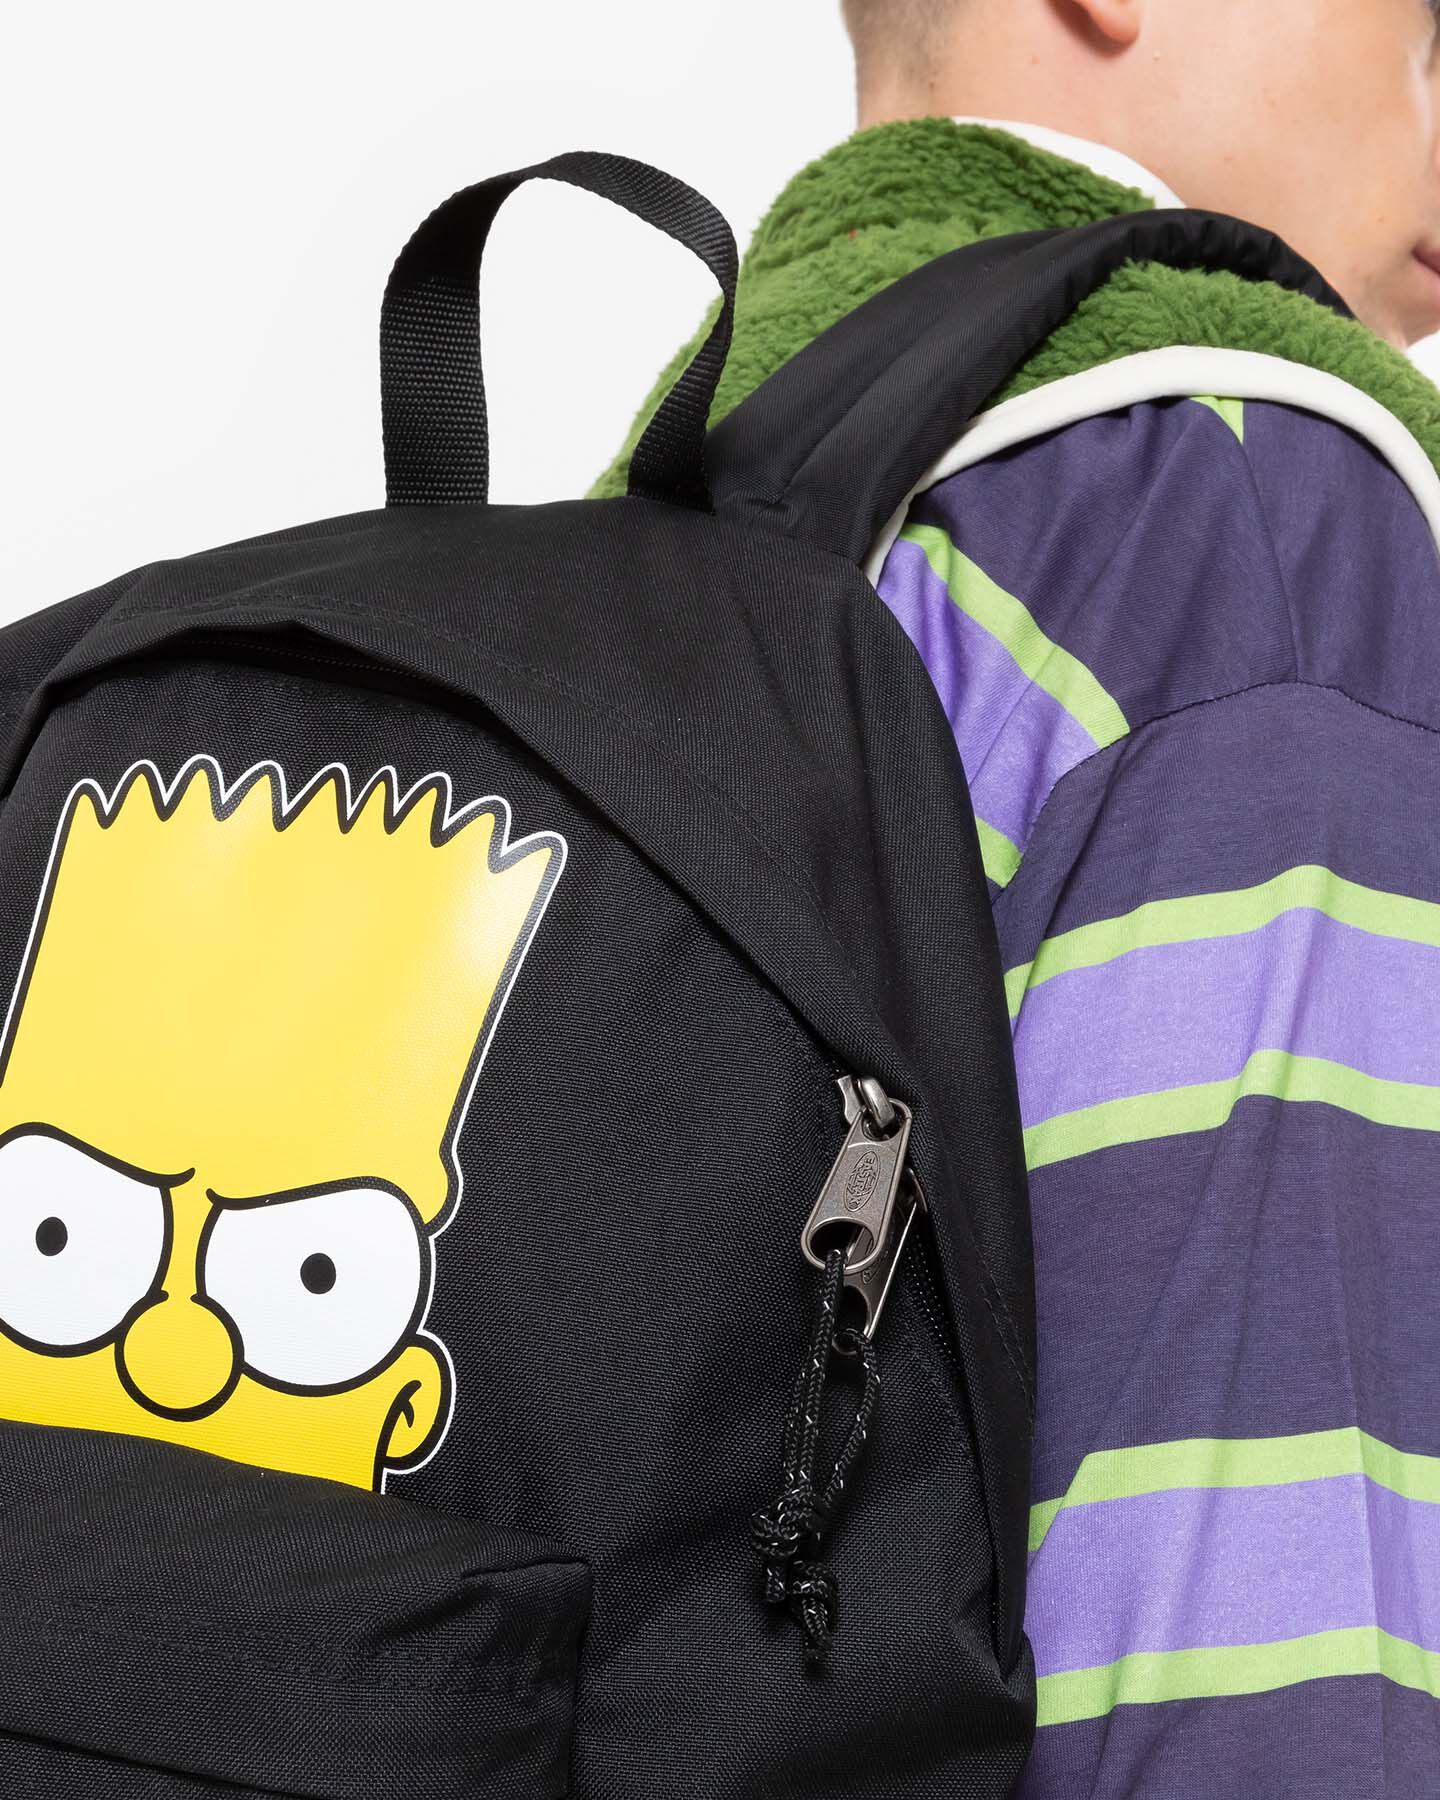  Zaino EASTPAK PADDED THE SIMPSONS BART  S5550523|7A3|OS scatto 5